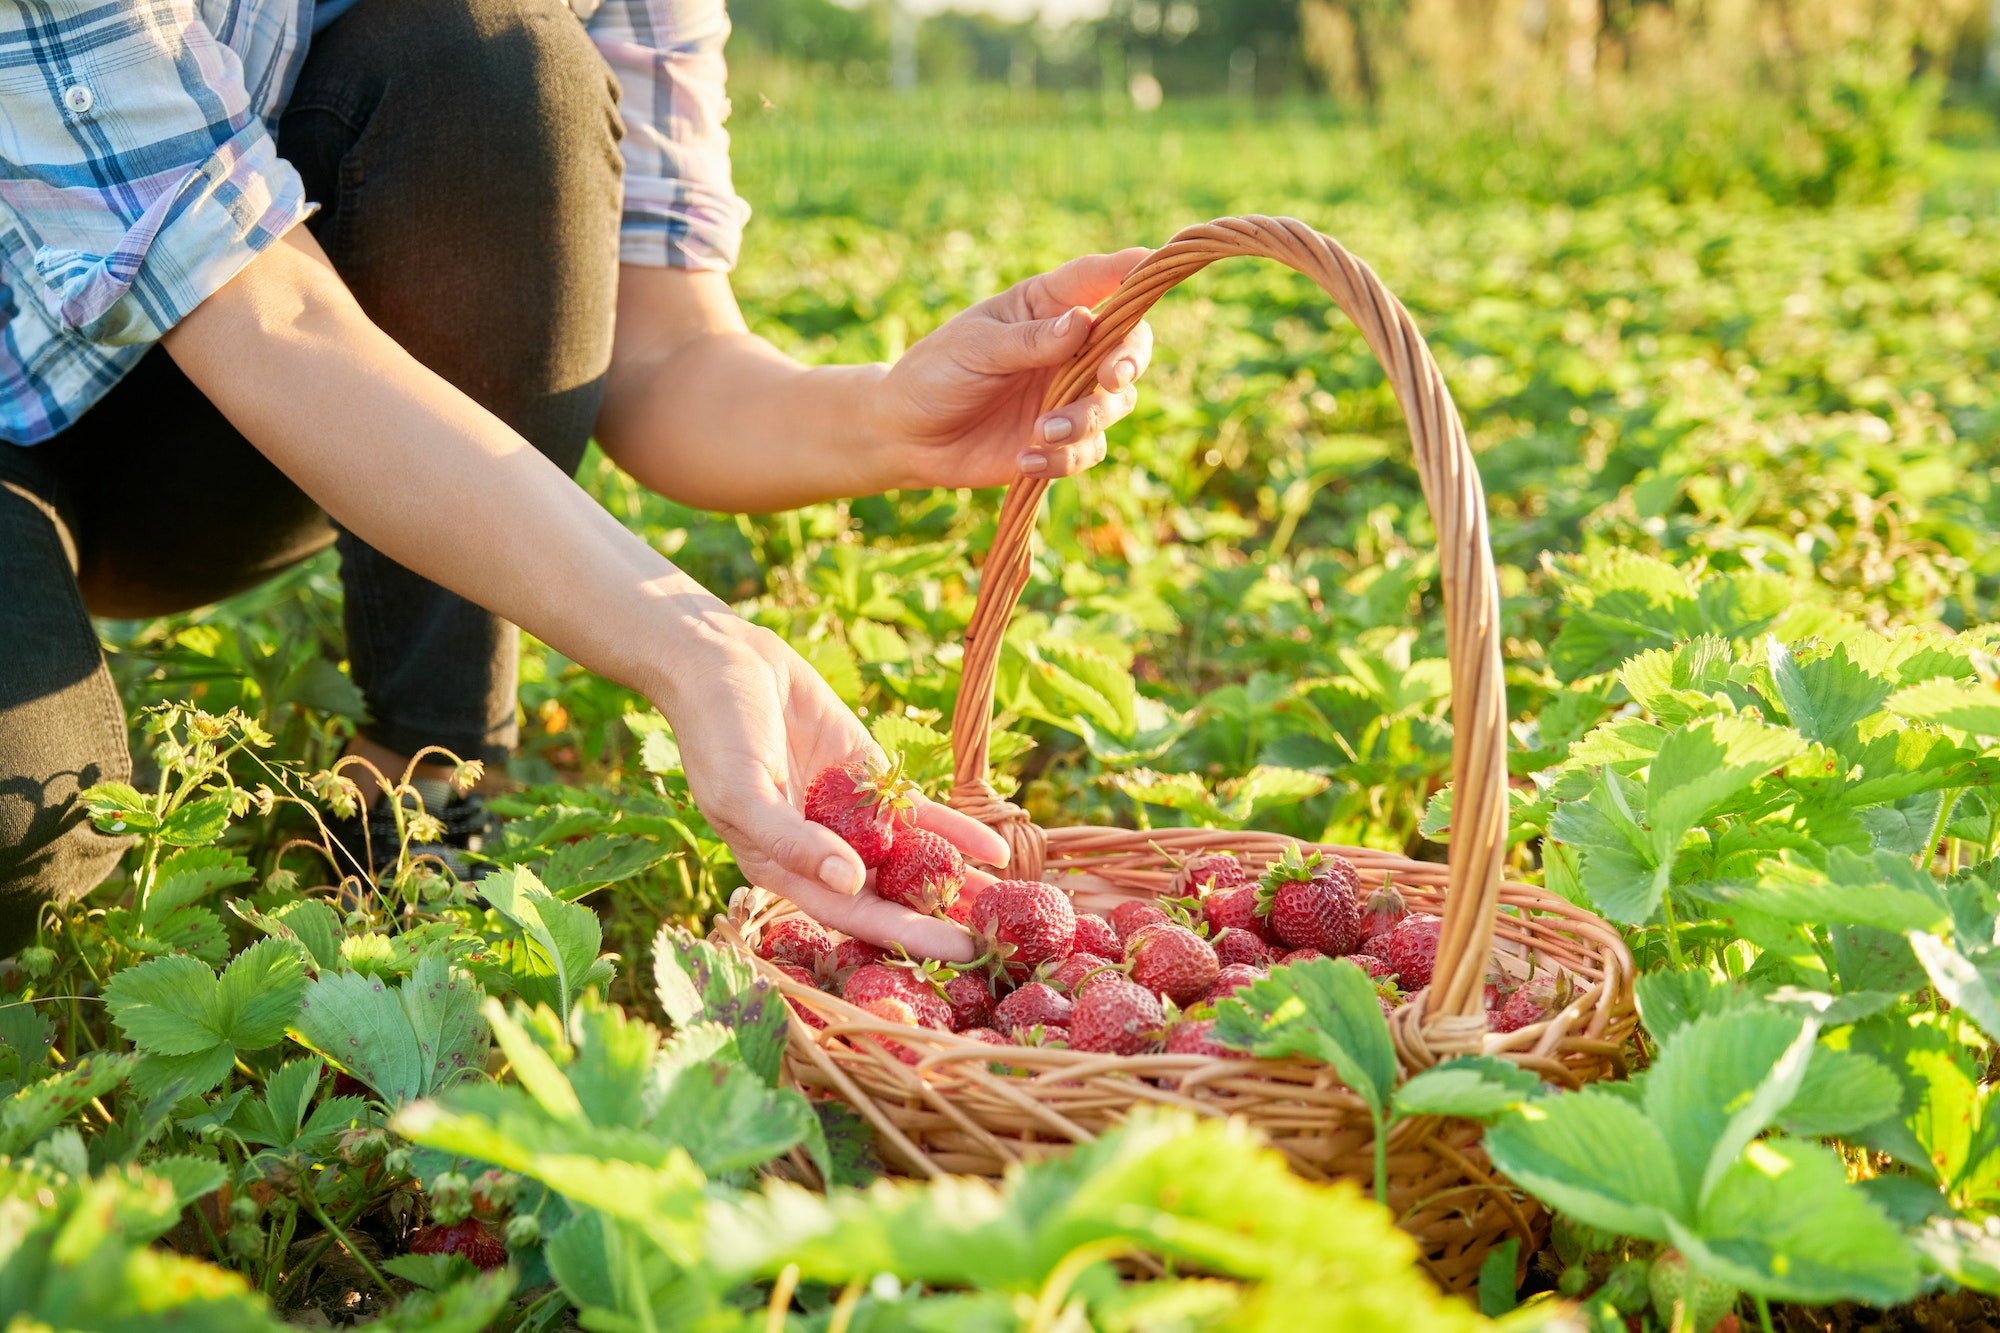 Farm field with strawberries, close-up of a basket with berries and a woman's hands